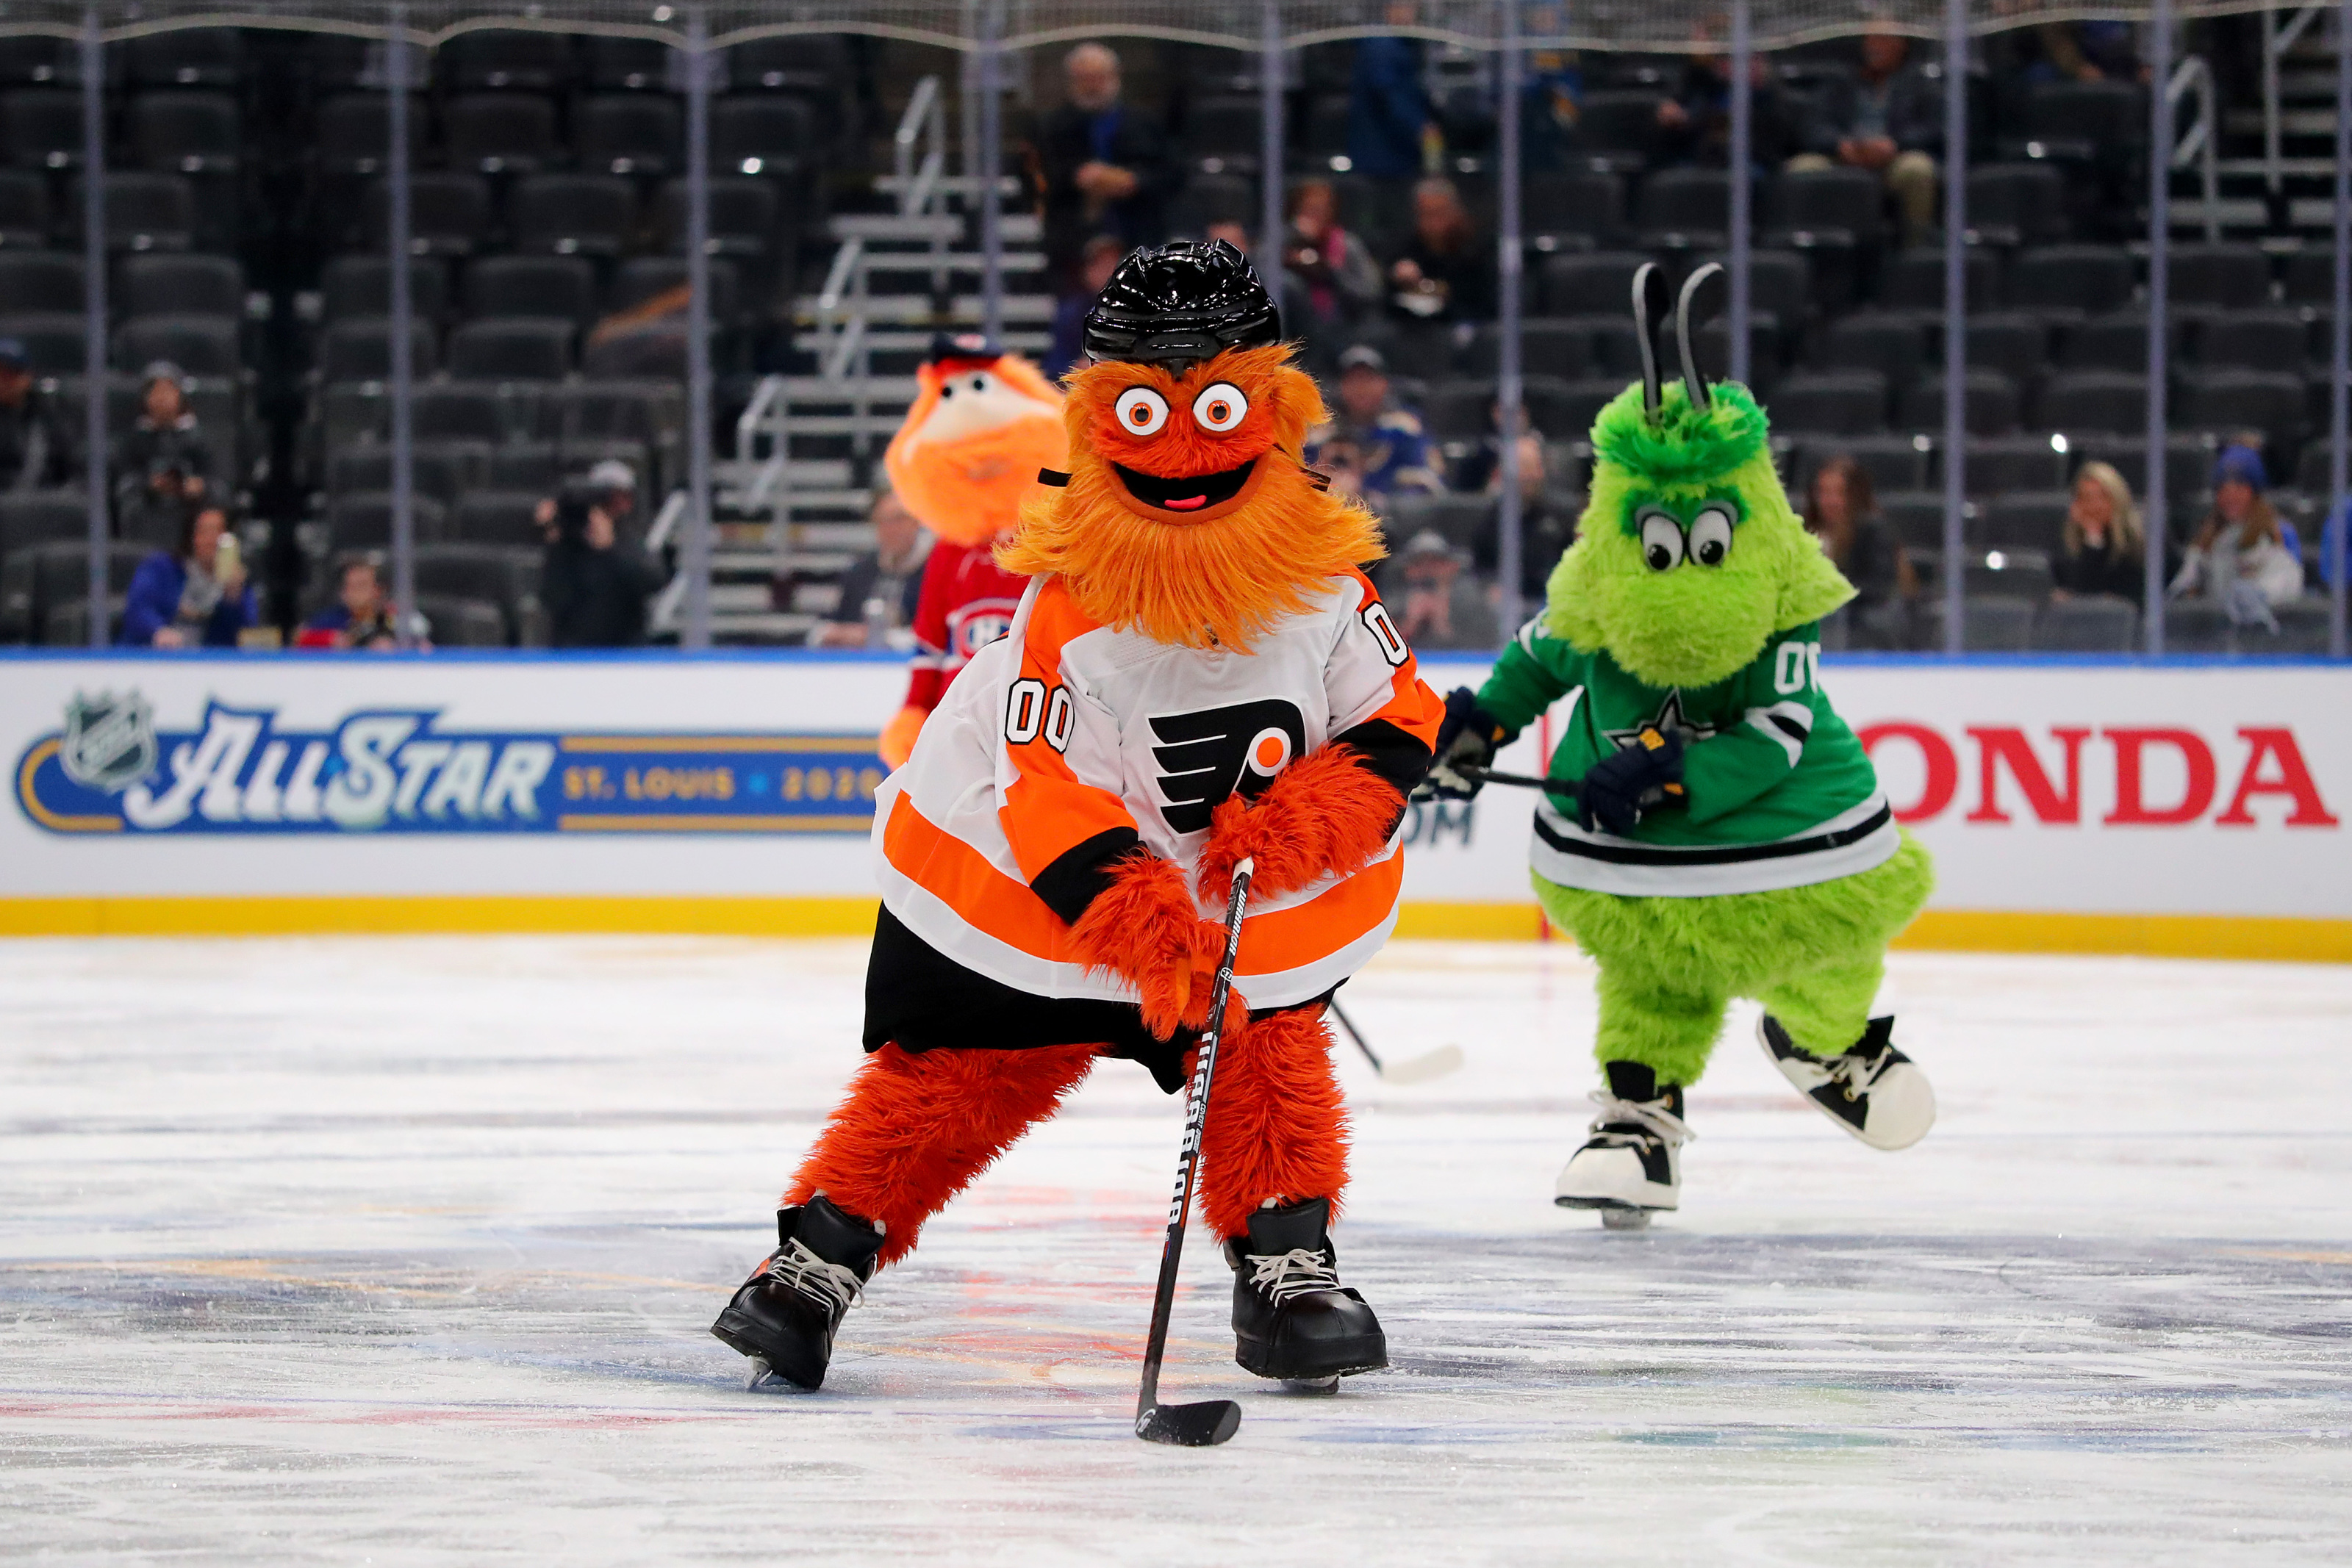 How I designed the mascot Gritty for the Philadelphia Flyers